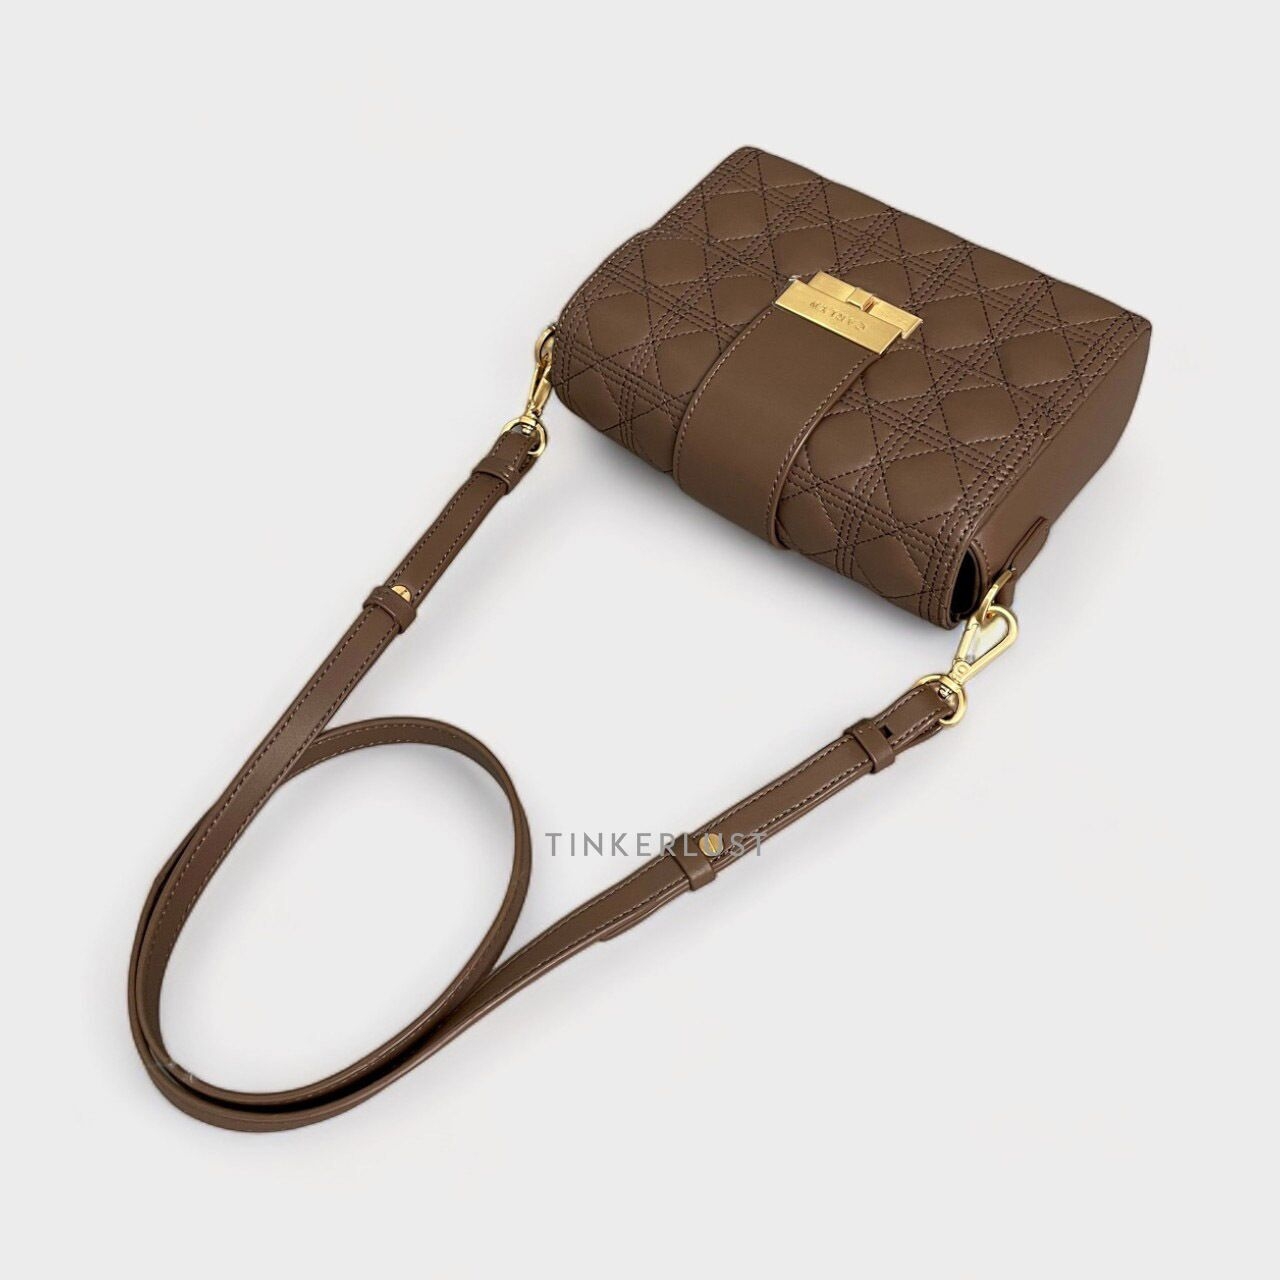 Carlyn Taupe Sling Bag